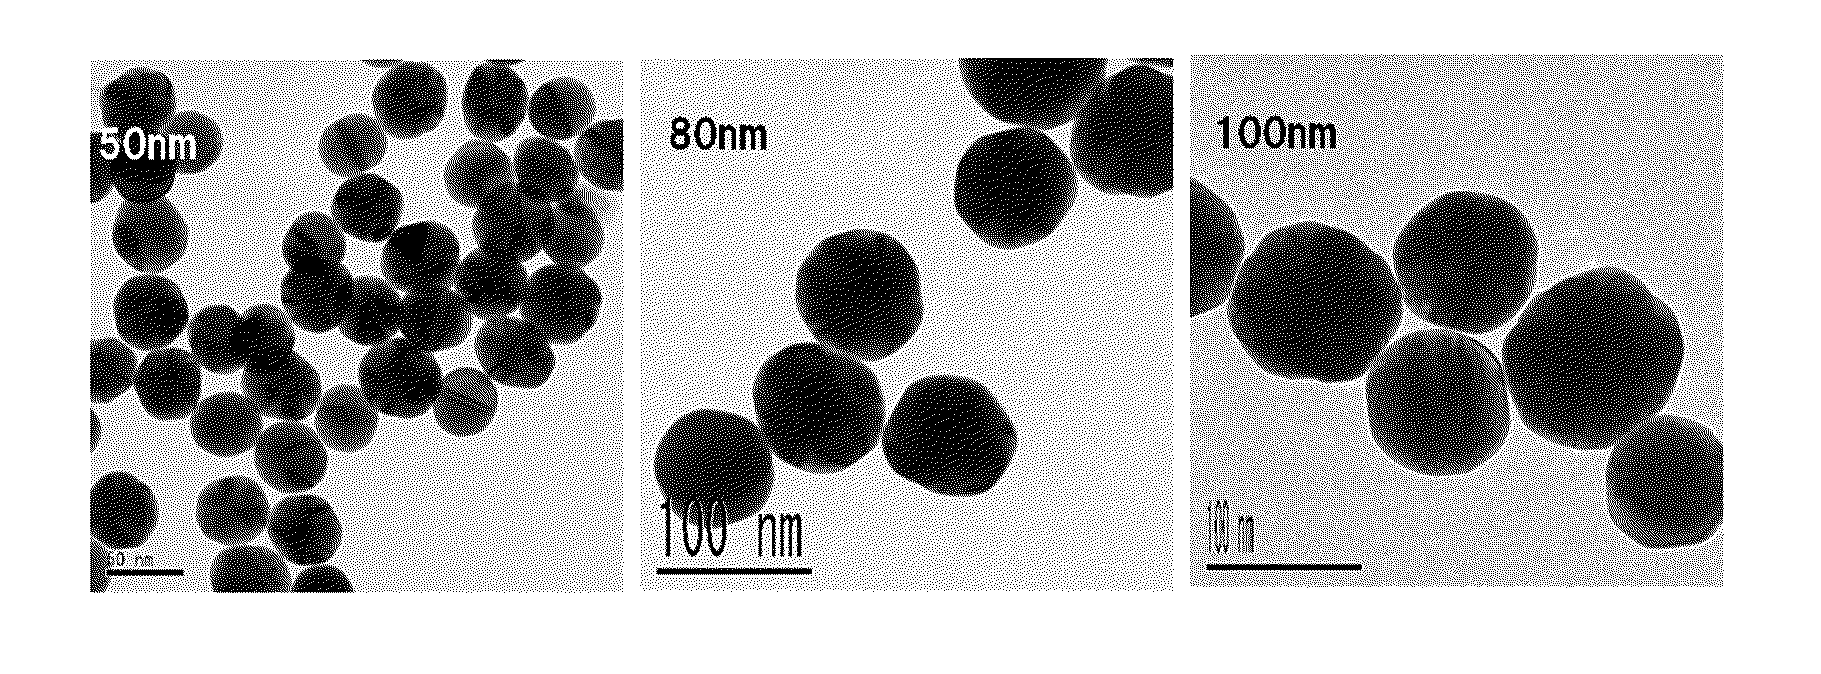 Process for production of colloidal gold and colloidal gold